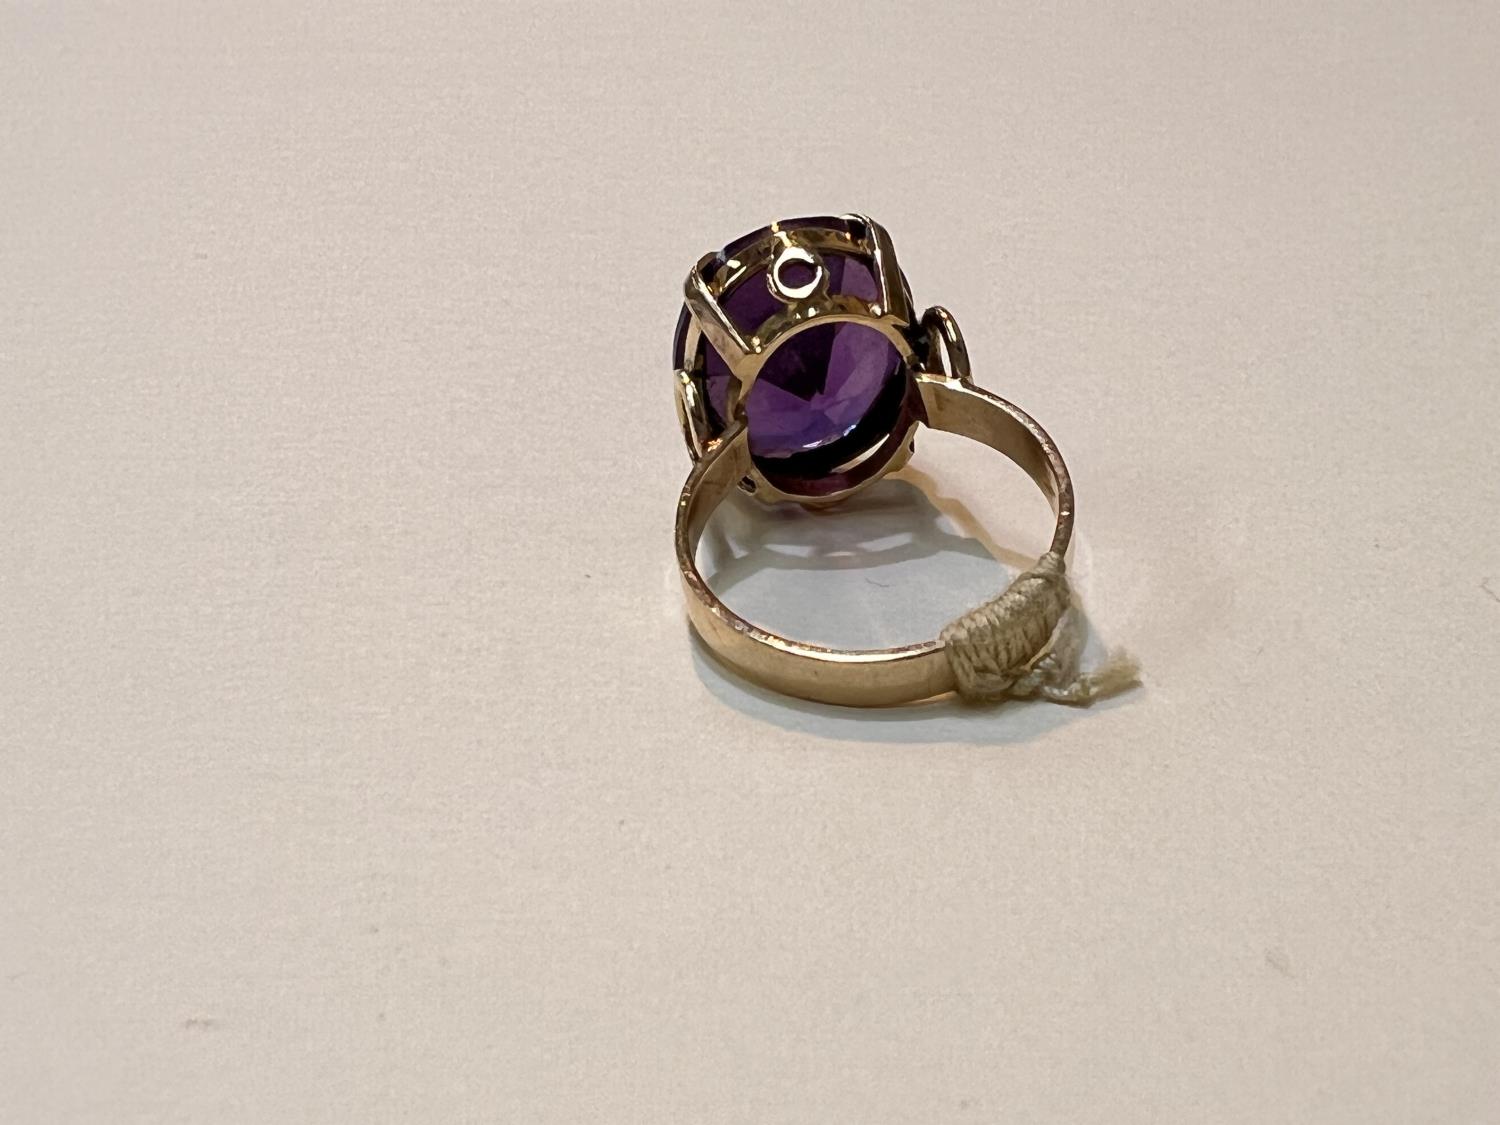 A yellow metal ring with large amethyst stone, Egyptian marked, weight 5.9gms, size M. - Image 3 of 3